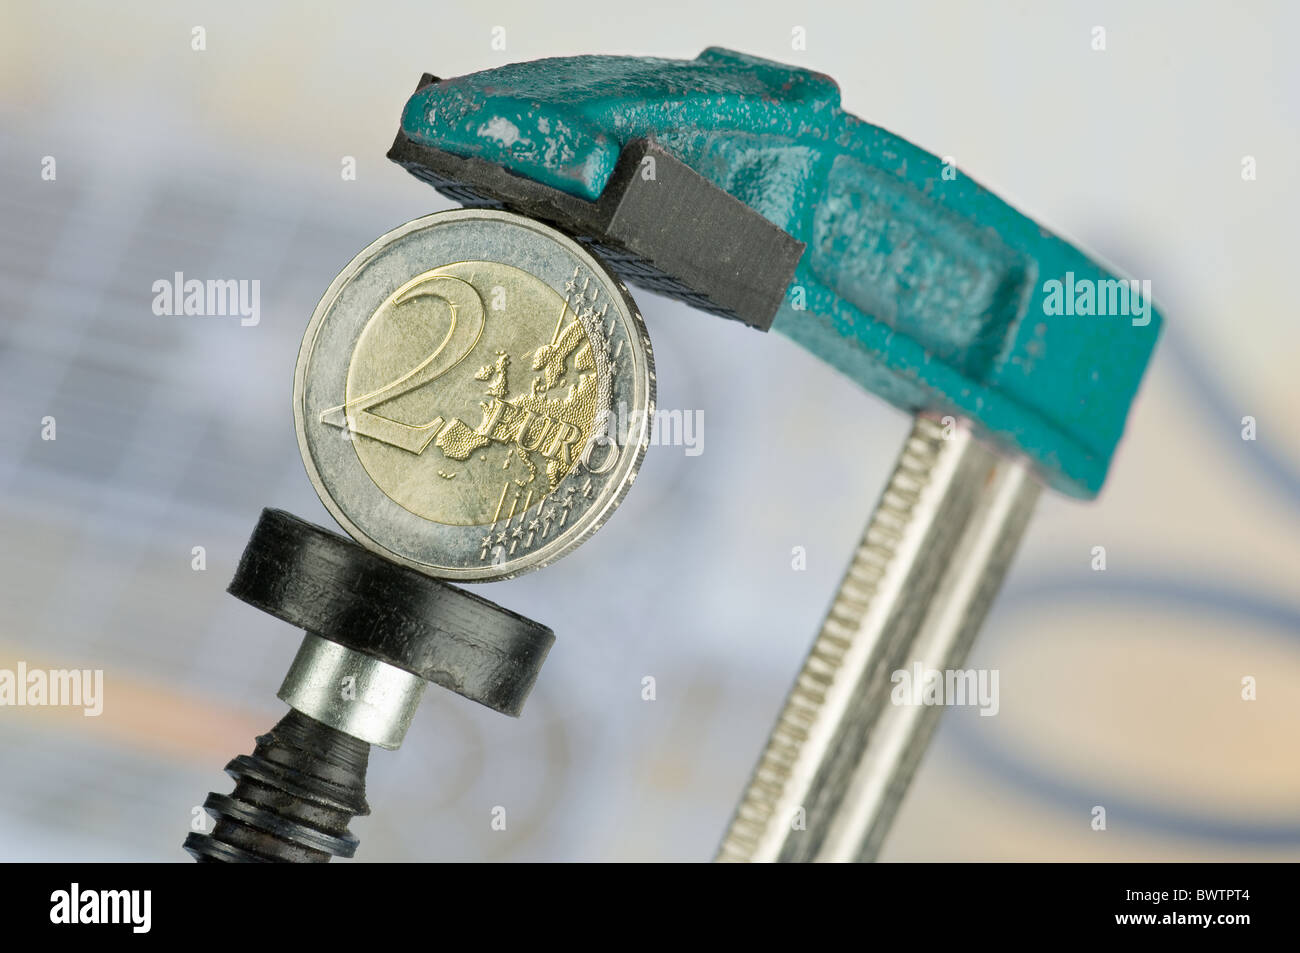 Euro coin in clamp Stock Photo